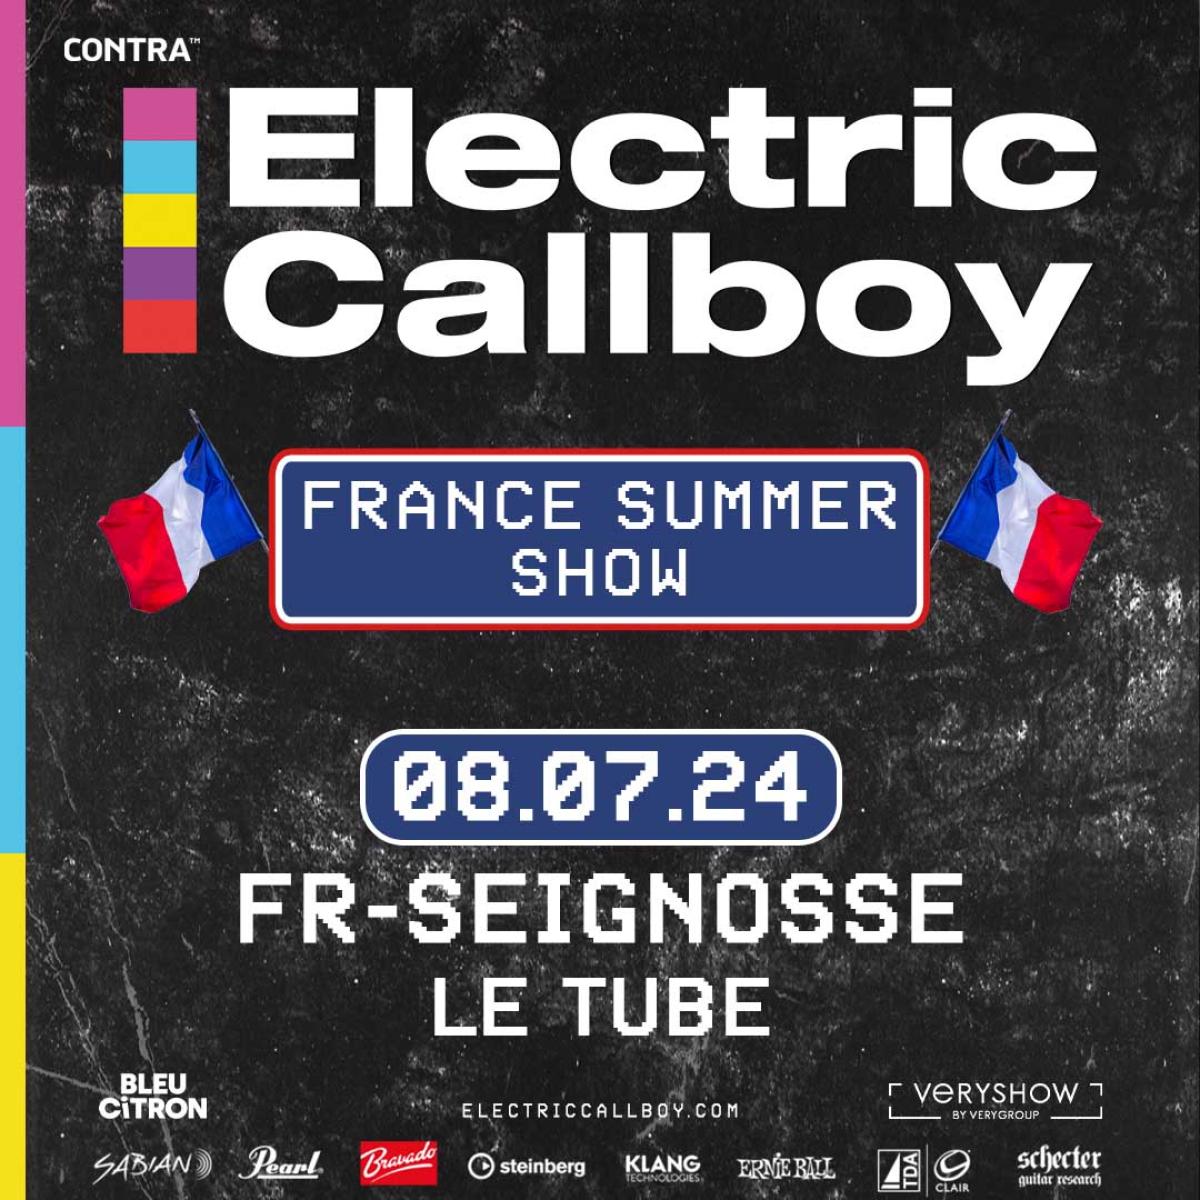 Electric Callboy at Le Tube - Les Bourdaines Tickets